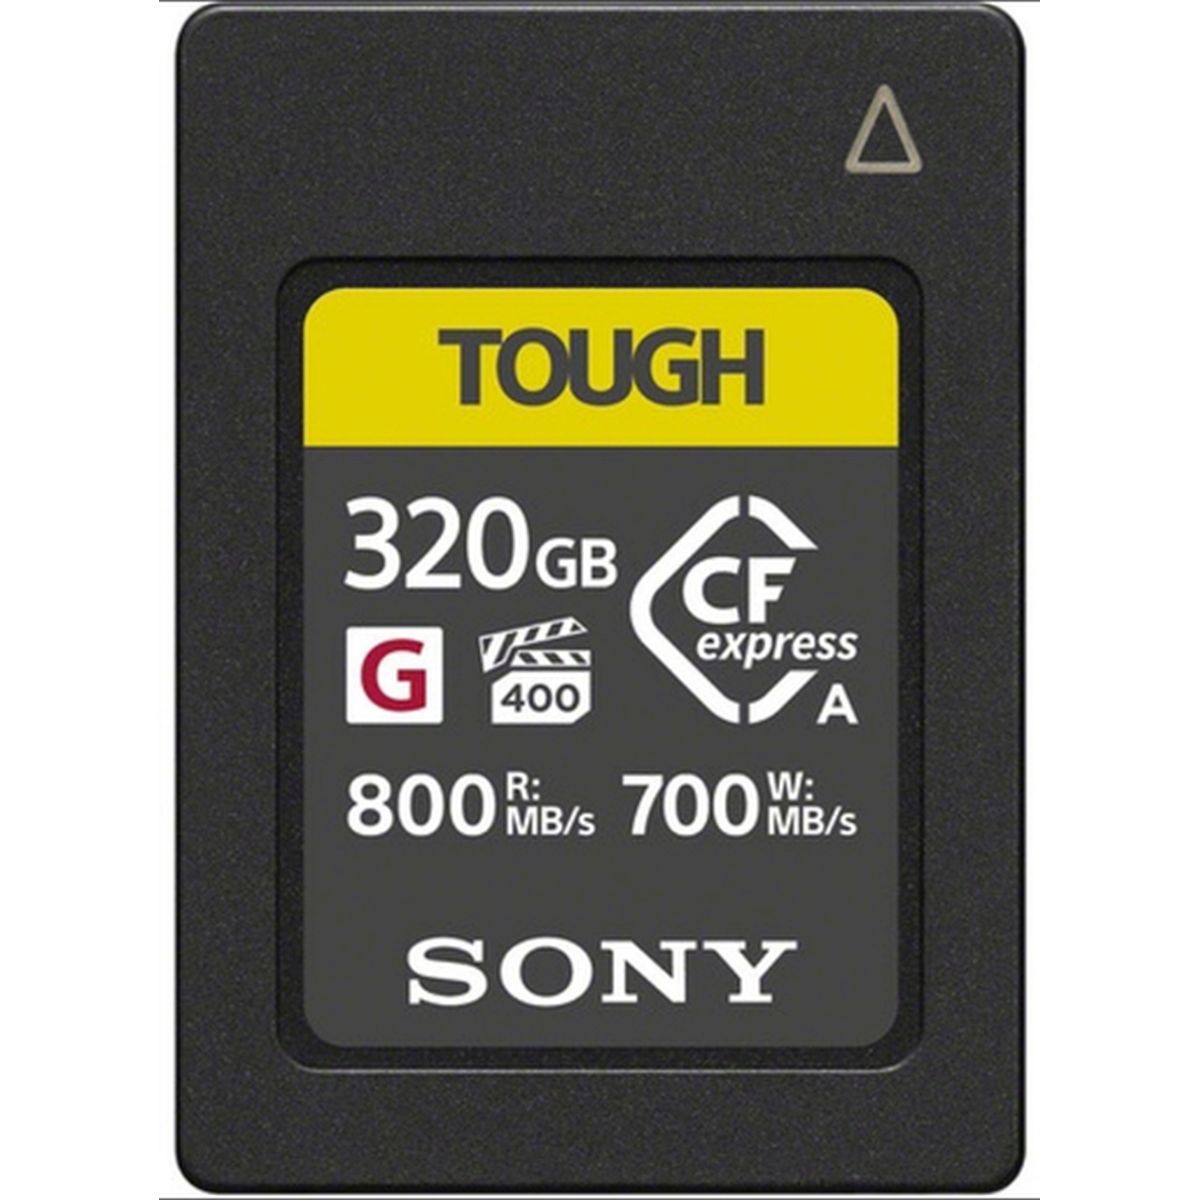 Sony CFexpress 320 GB Typ A (800/700 MB/s)